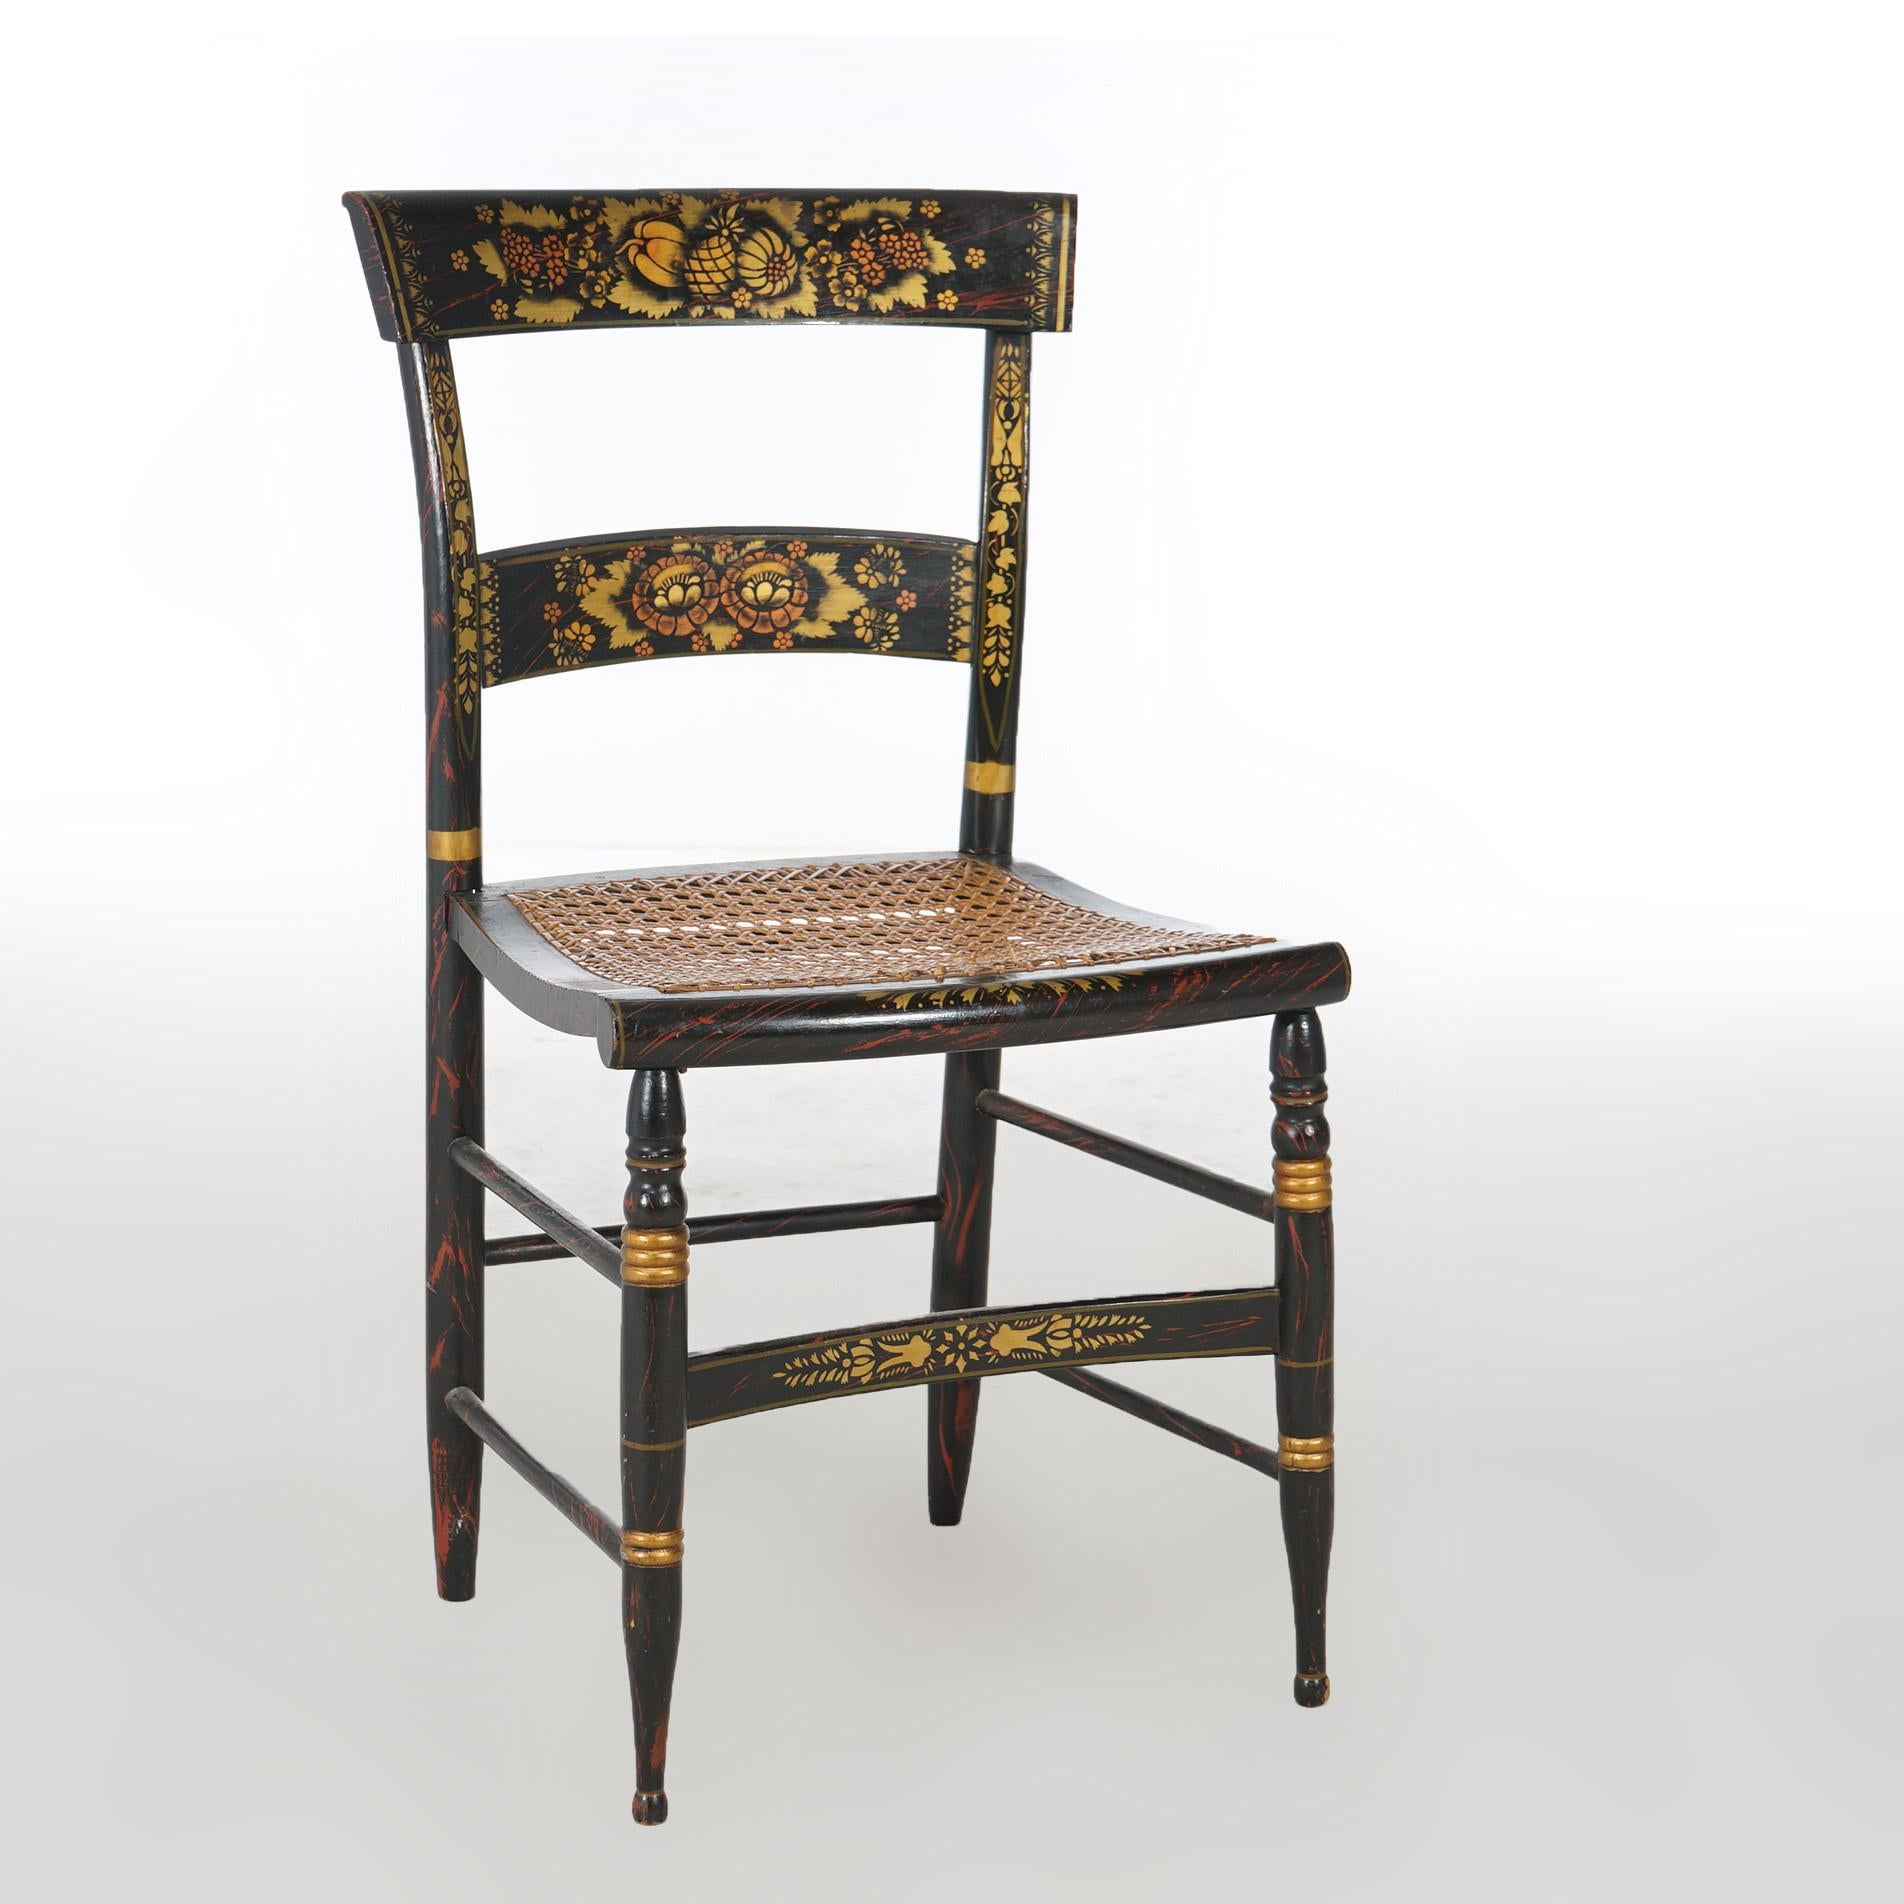 An antique set of four Hitchcock style dining chairs by Walter Smith offer gilt decorated ebonized wood construction with caned seats, signed Walter Smith, c1900

Measure - 33.5